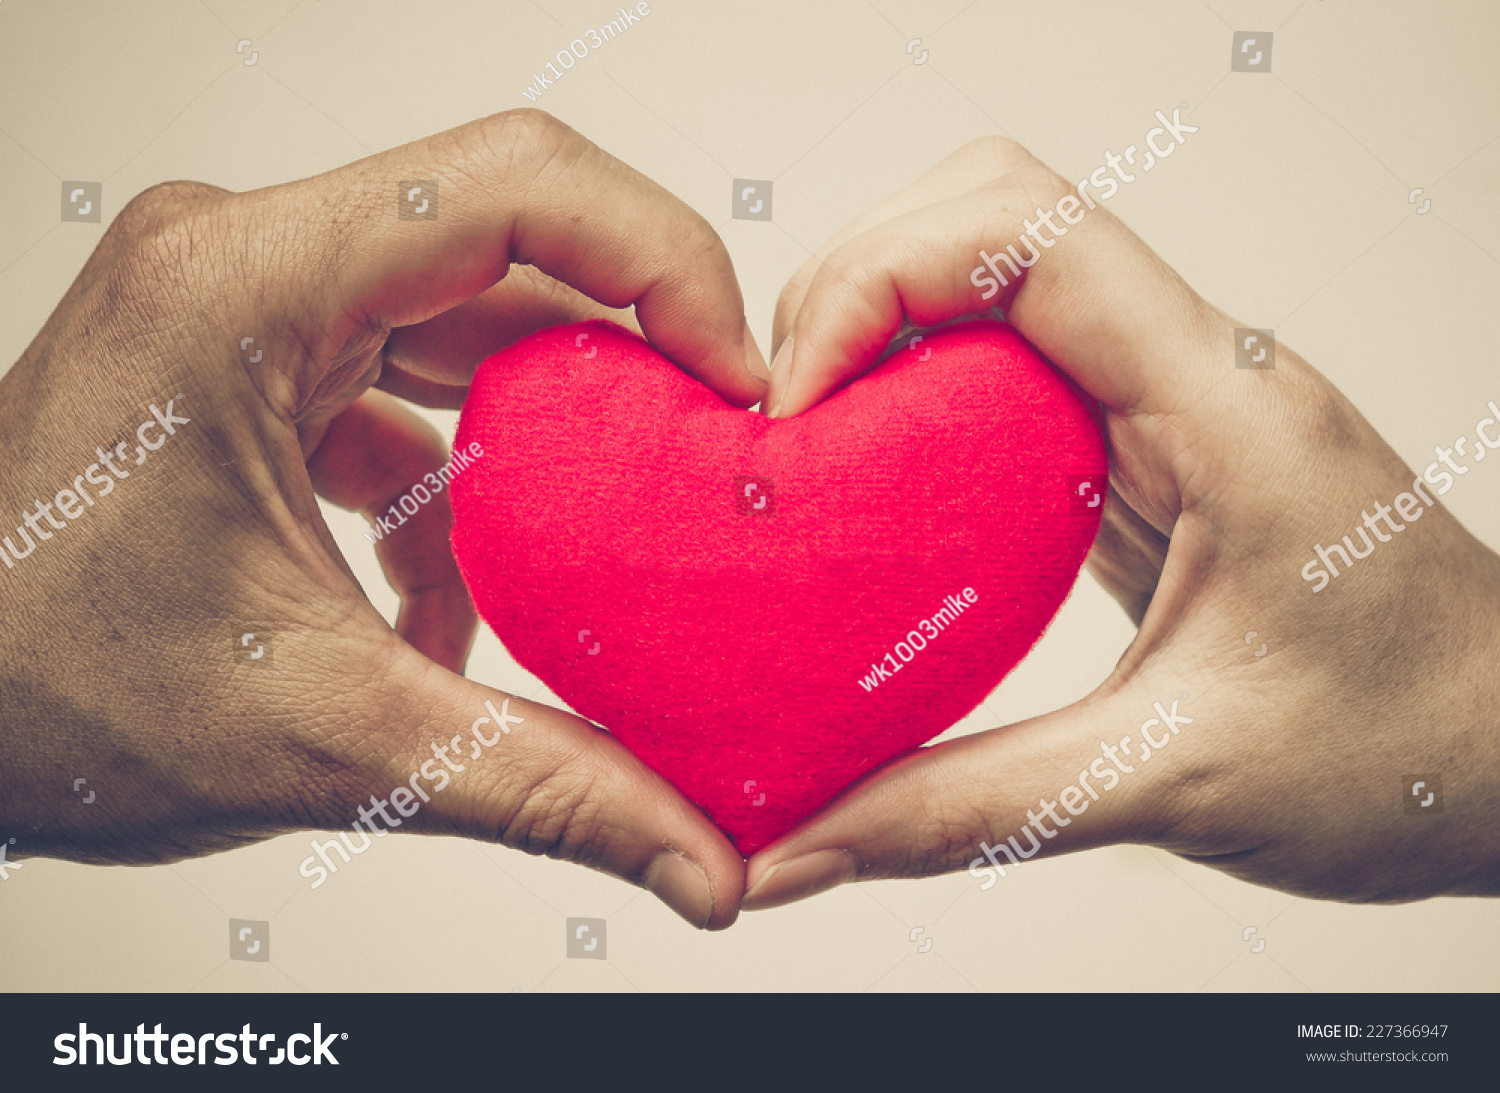 Man'S Hand And Woman'S Hand Holding A Red Heart Stock Photo 227366947 ...